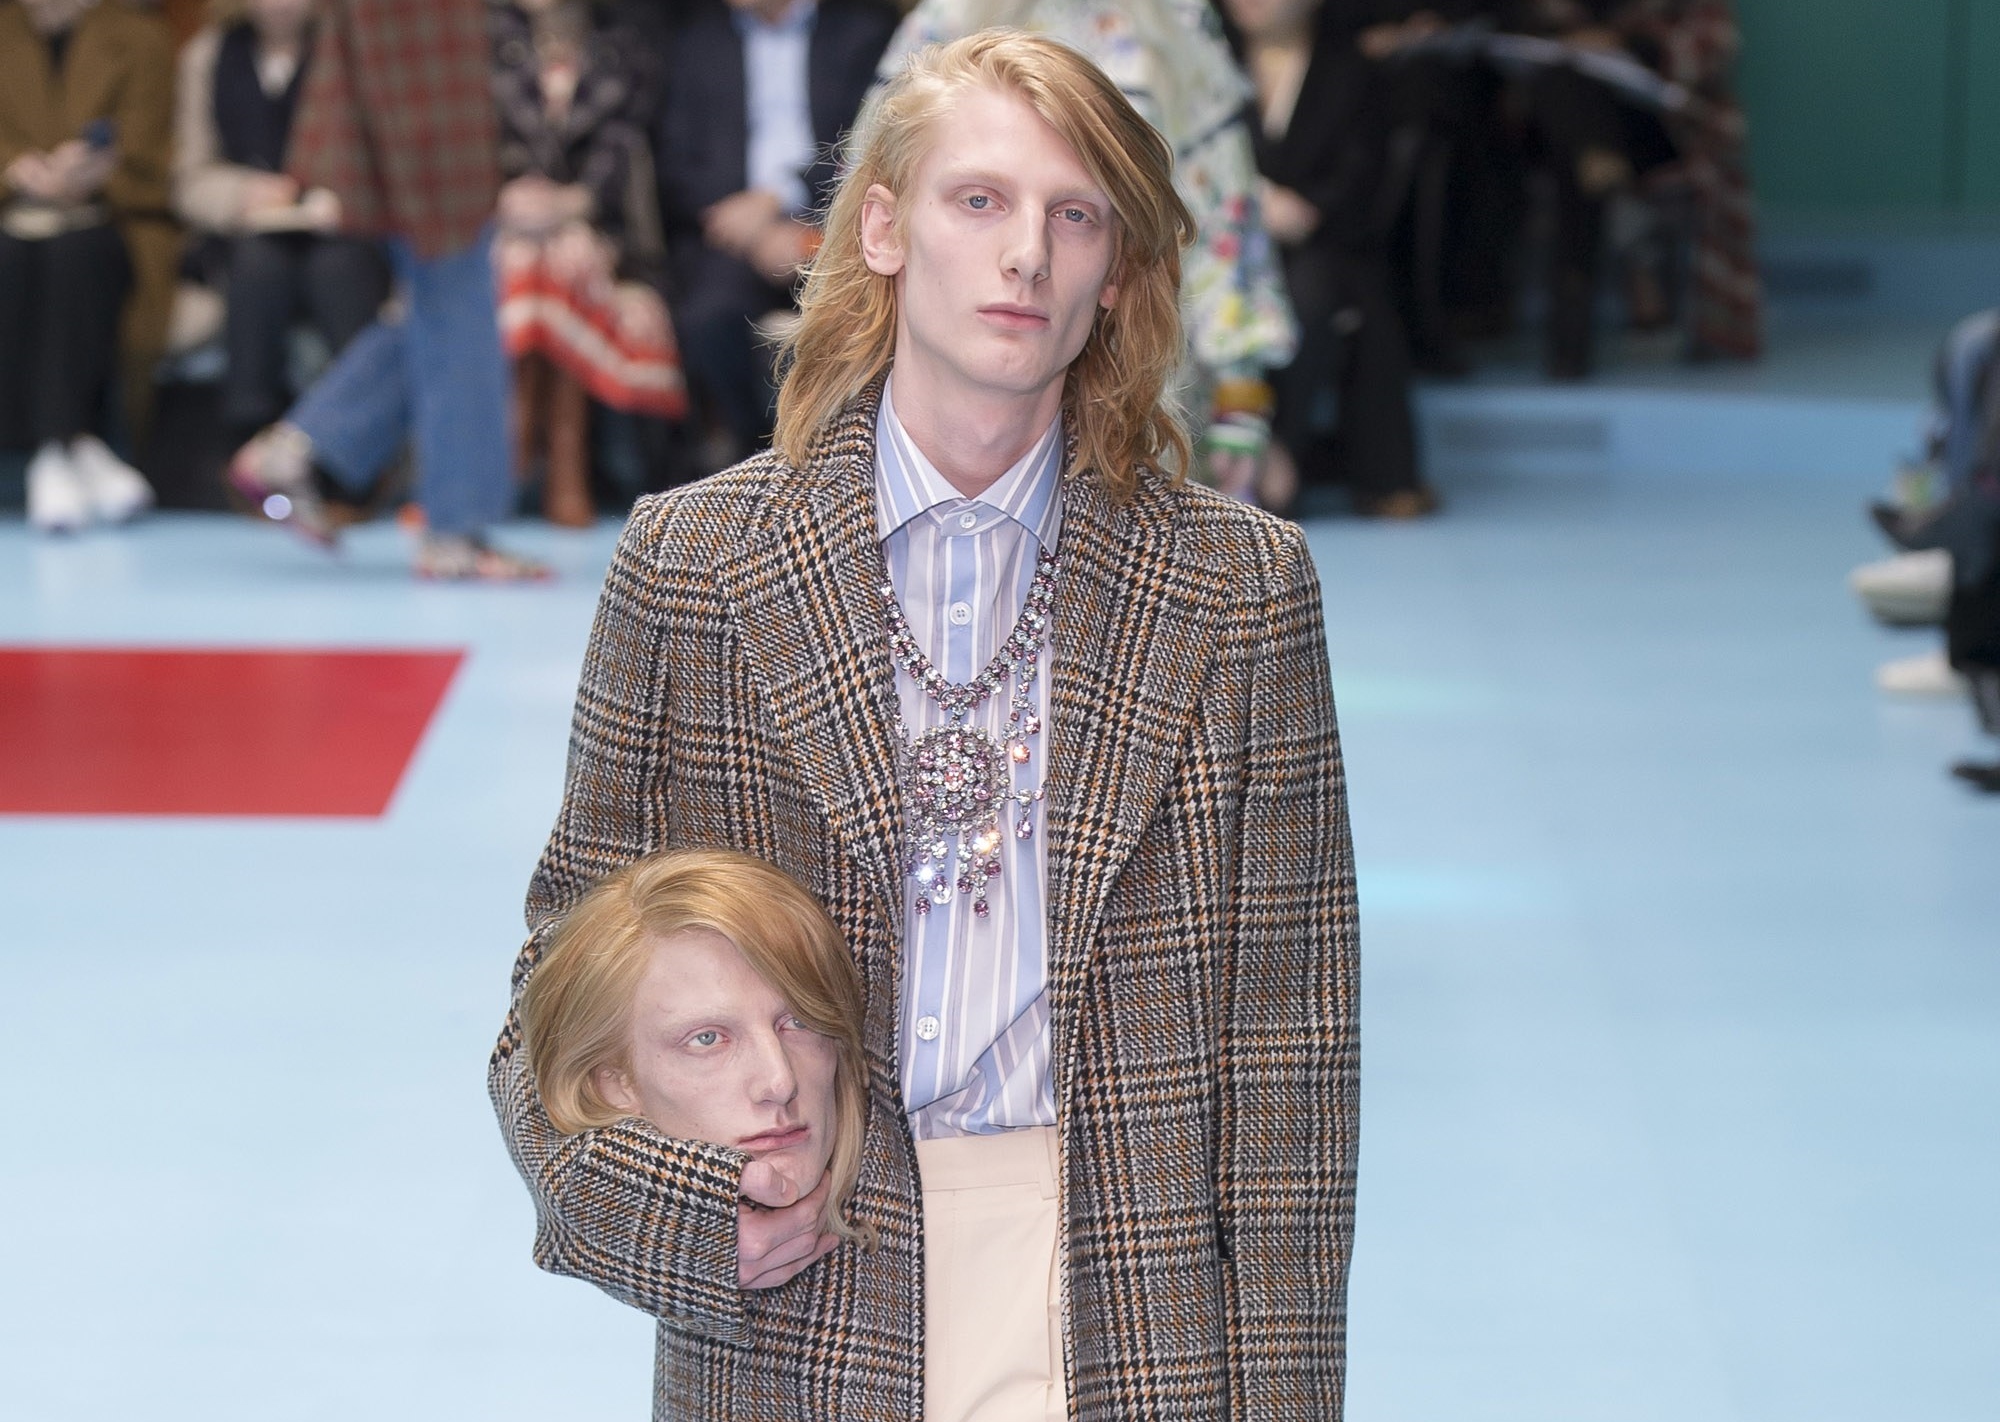 Milan Fashion Week 2018: Gucci brings on severed heads, Tommy